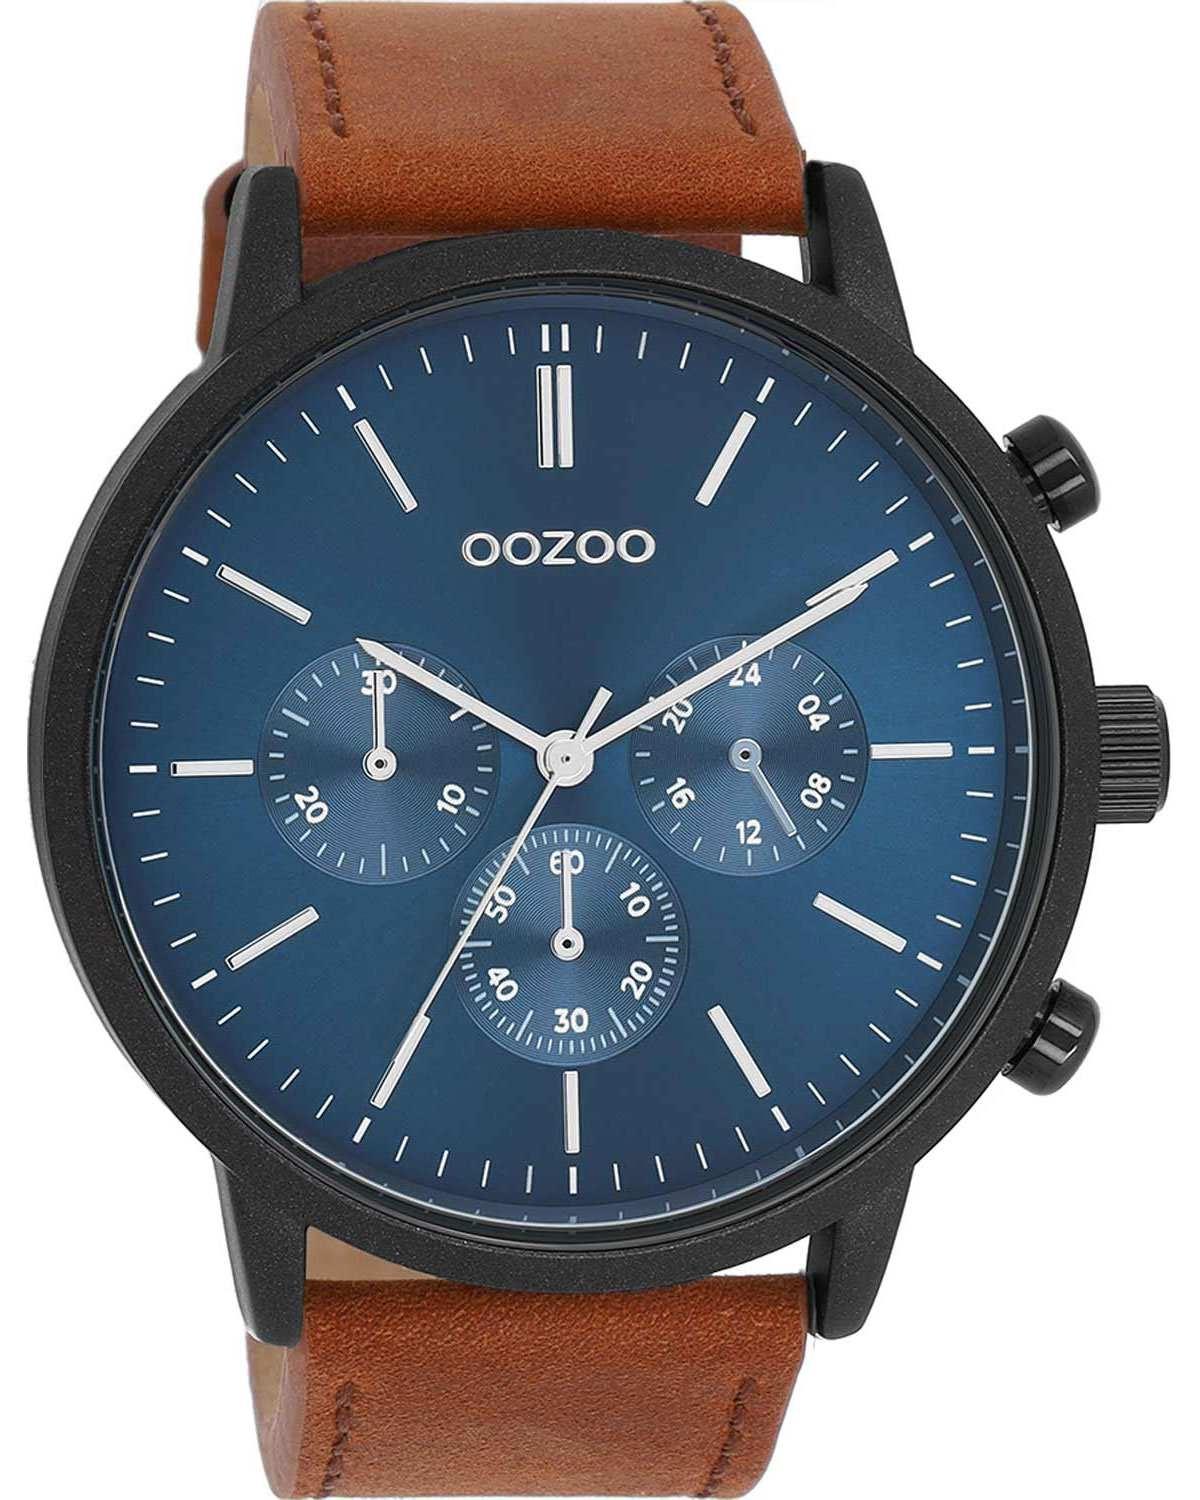 oozoo timepieces c11202 black case with brown leather strap image1